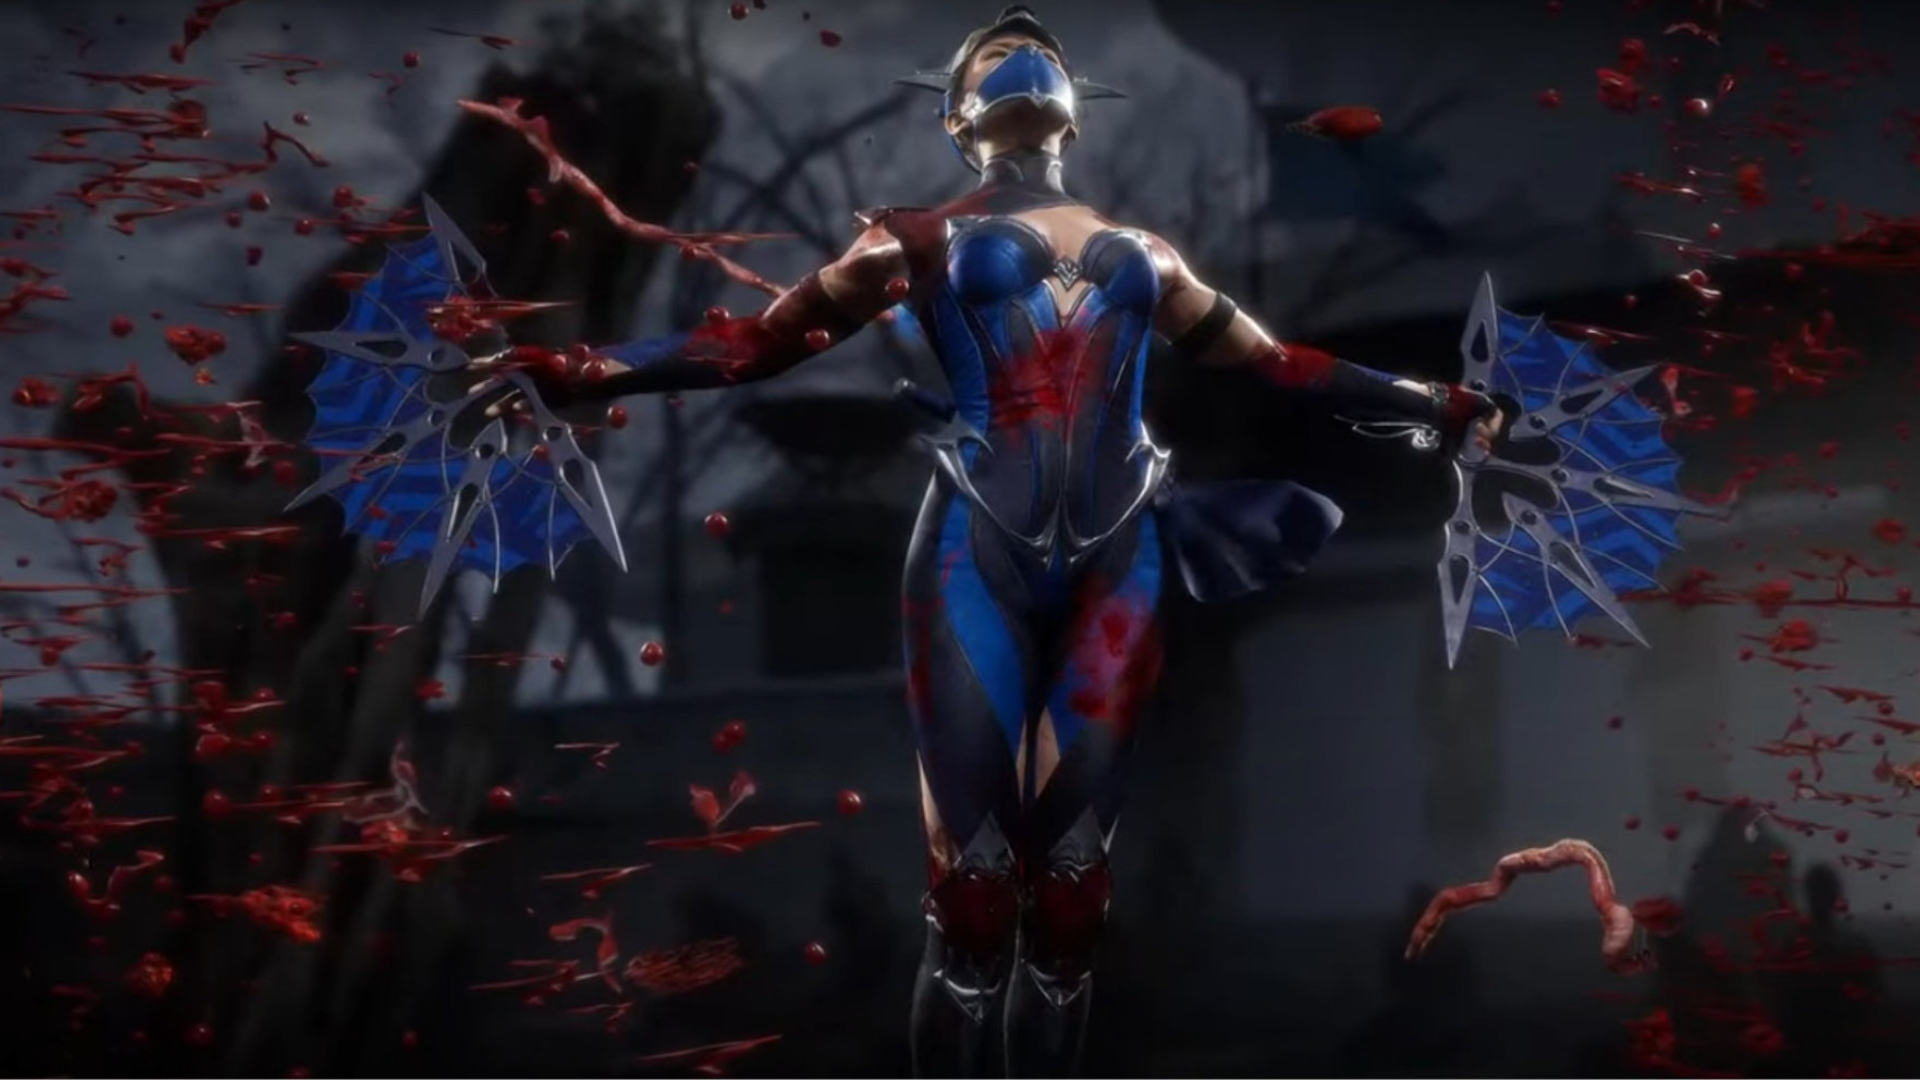 Mortal Kombat 11' Fatalities: How to Perform Both Finishers